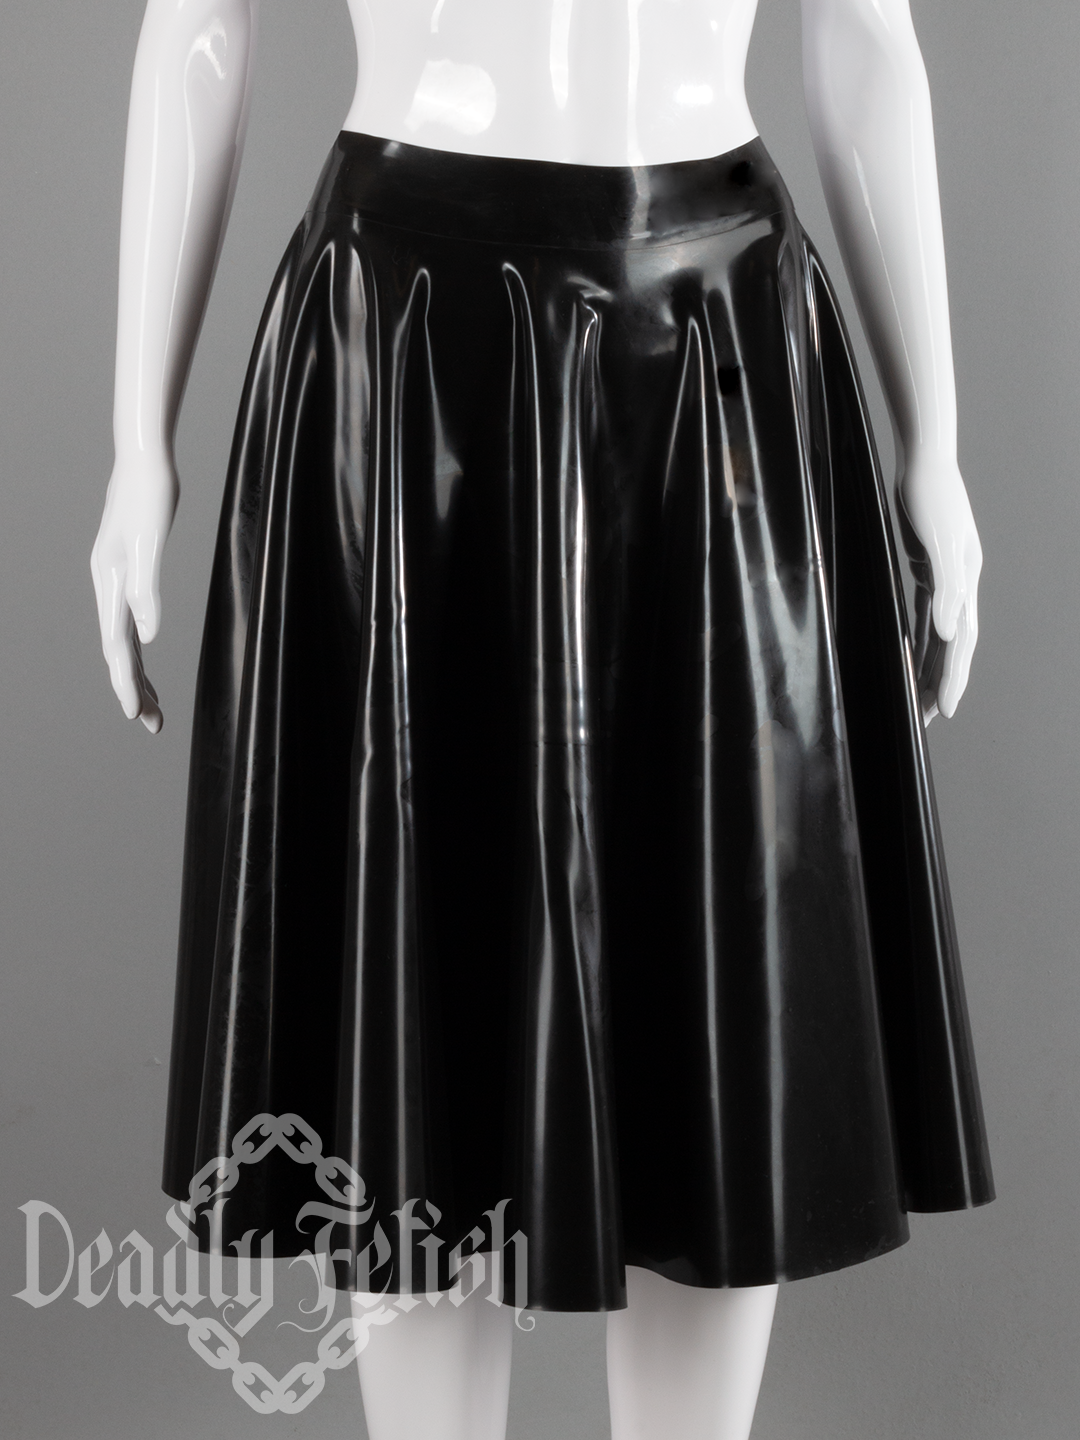 Deadly Fetish Made-to-Order Latex: Skirt #21